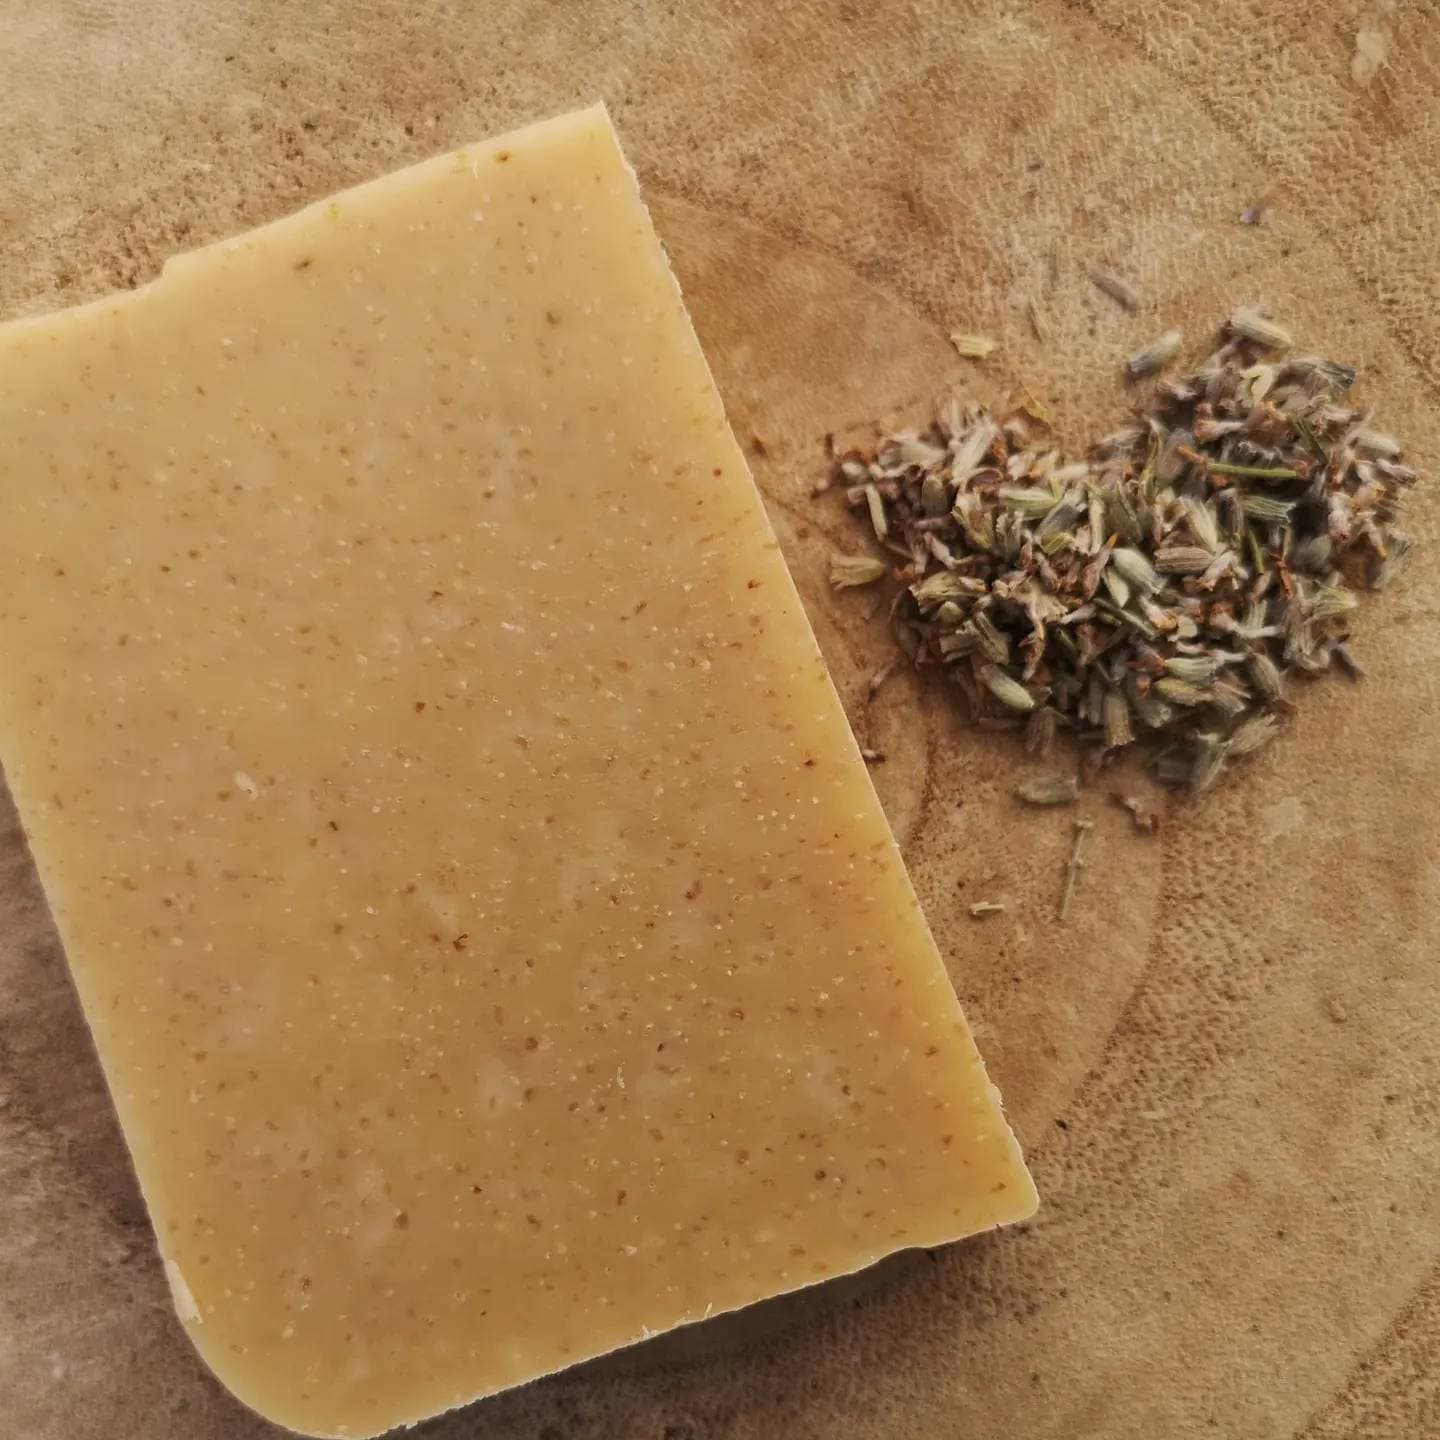 Rosehip and Oat Milk luxury soap bar. Infant and adult soap for sensitive skin. Lavender scent. Organic, vegan, handmade, cold process.